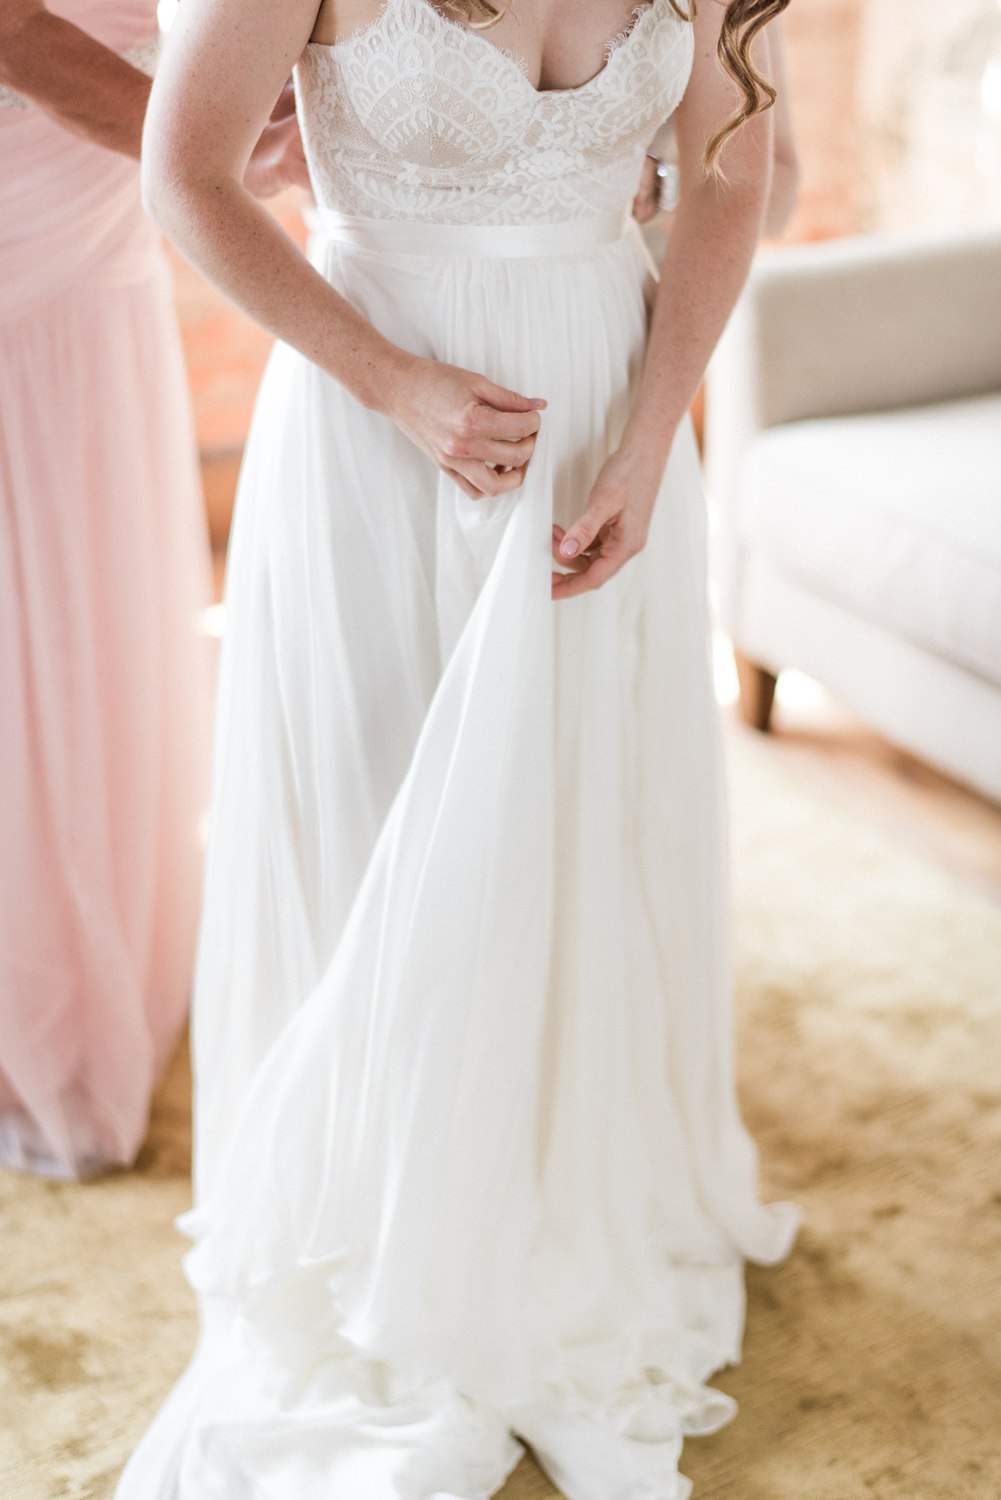 The Standard Knoxville Wedding | Knoxville Wedding Photographer